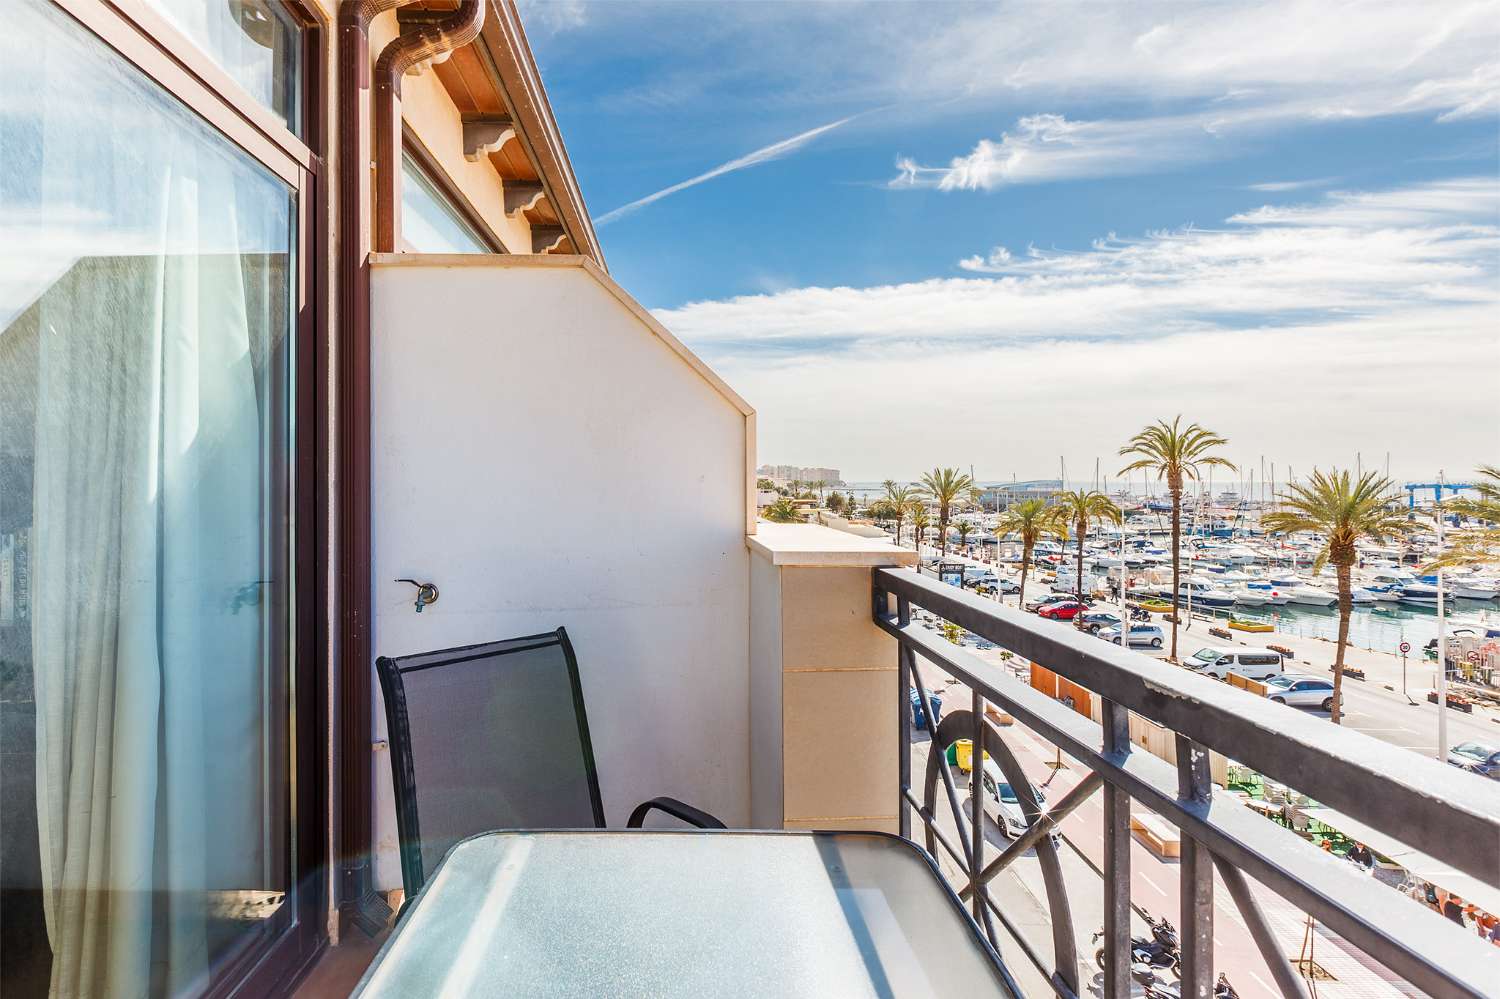 One bedroom penthouse with terrace and views of the La Caleta marina and the sea